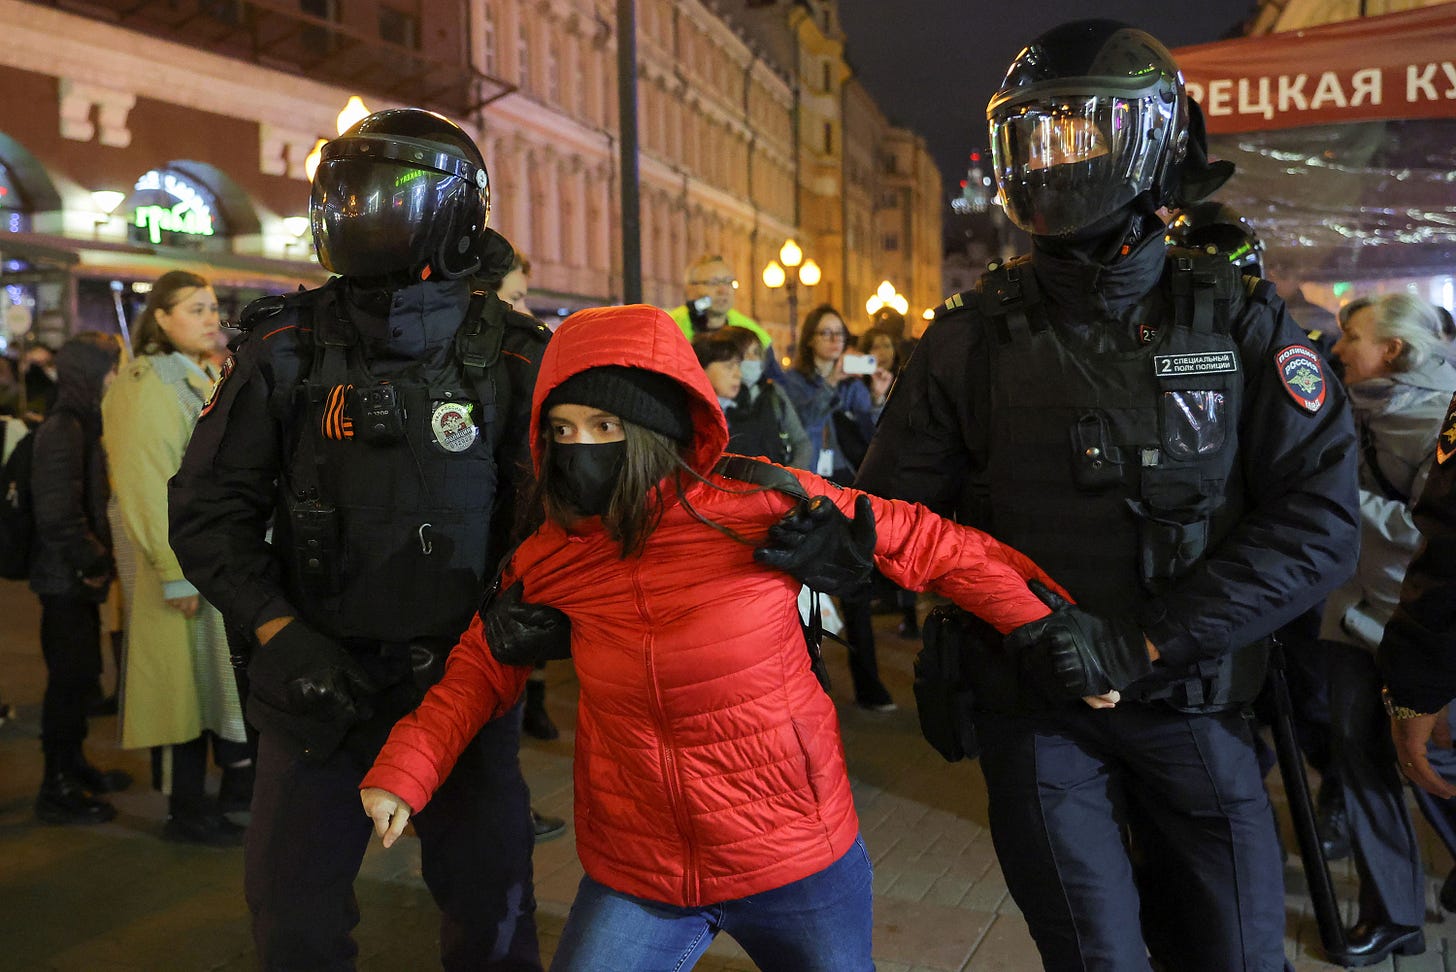 Russian police officers detain a person during a protest in Moscow on Wednesday.